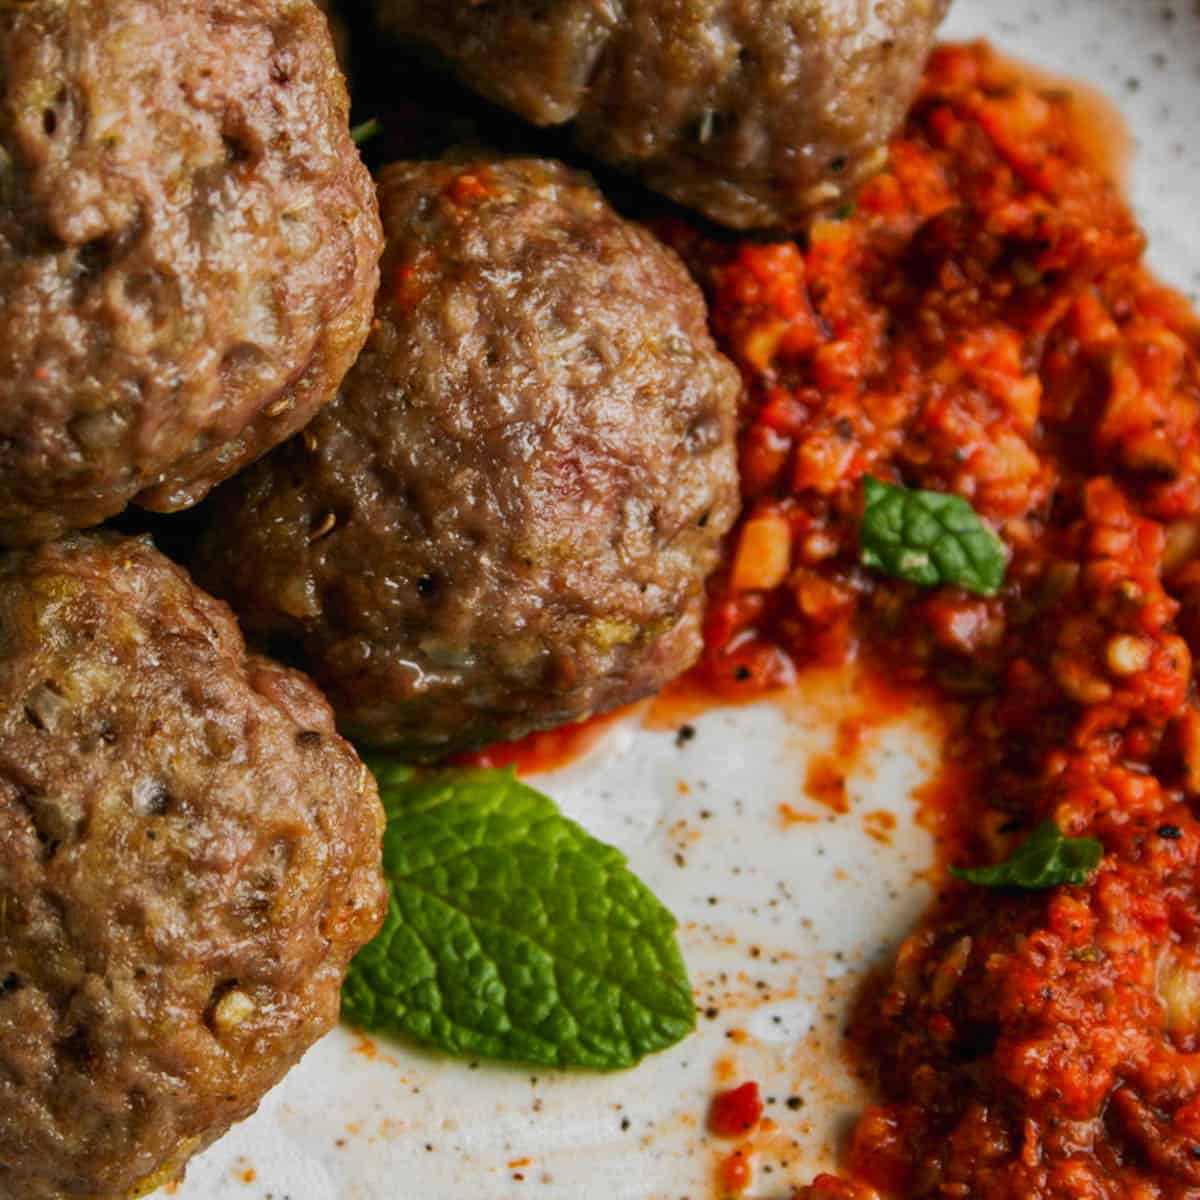 Juicy lamb meatballs on a white plate with Middle Eastern inspired Romesco sauce.